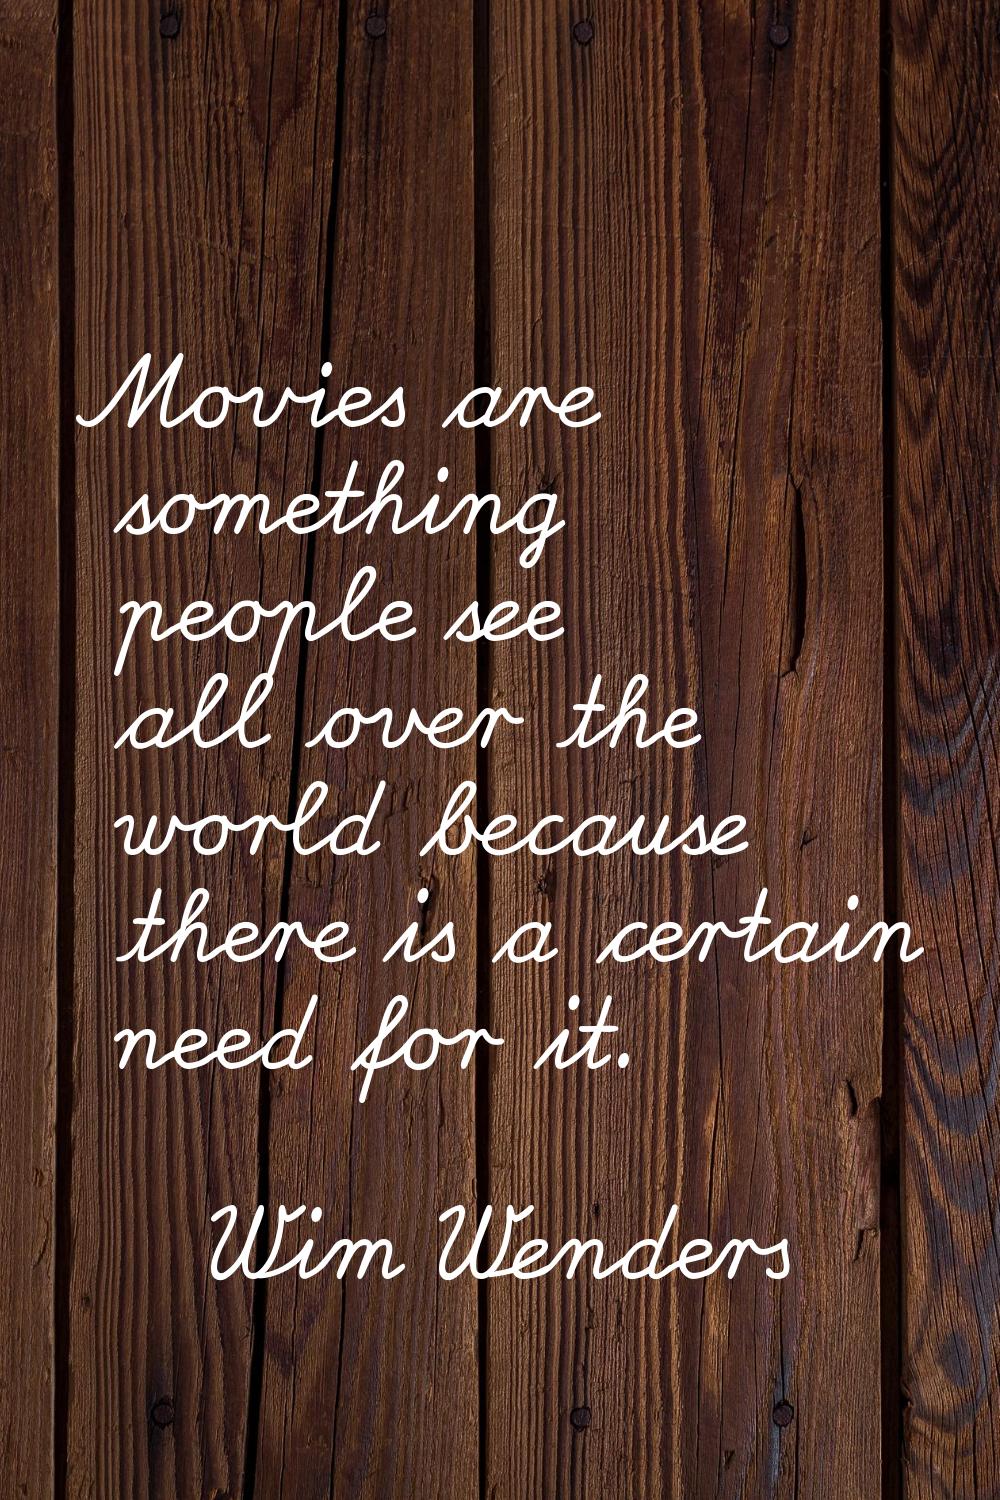 Movies are something people see all over the world because there is a certain need for it.